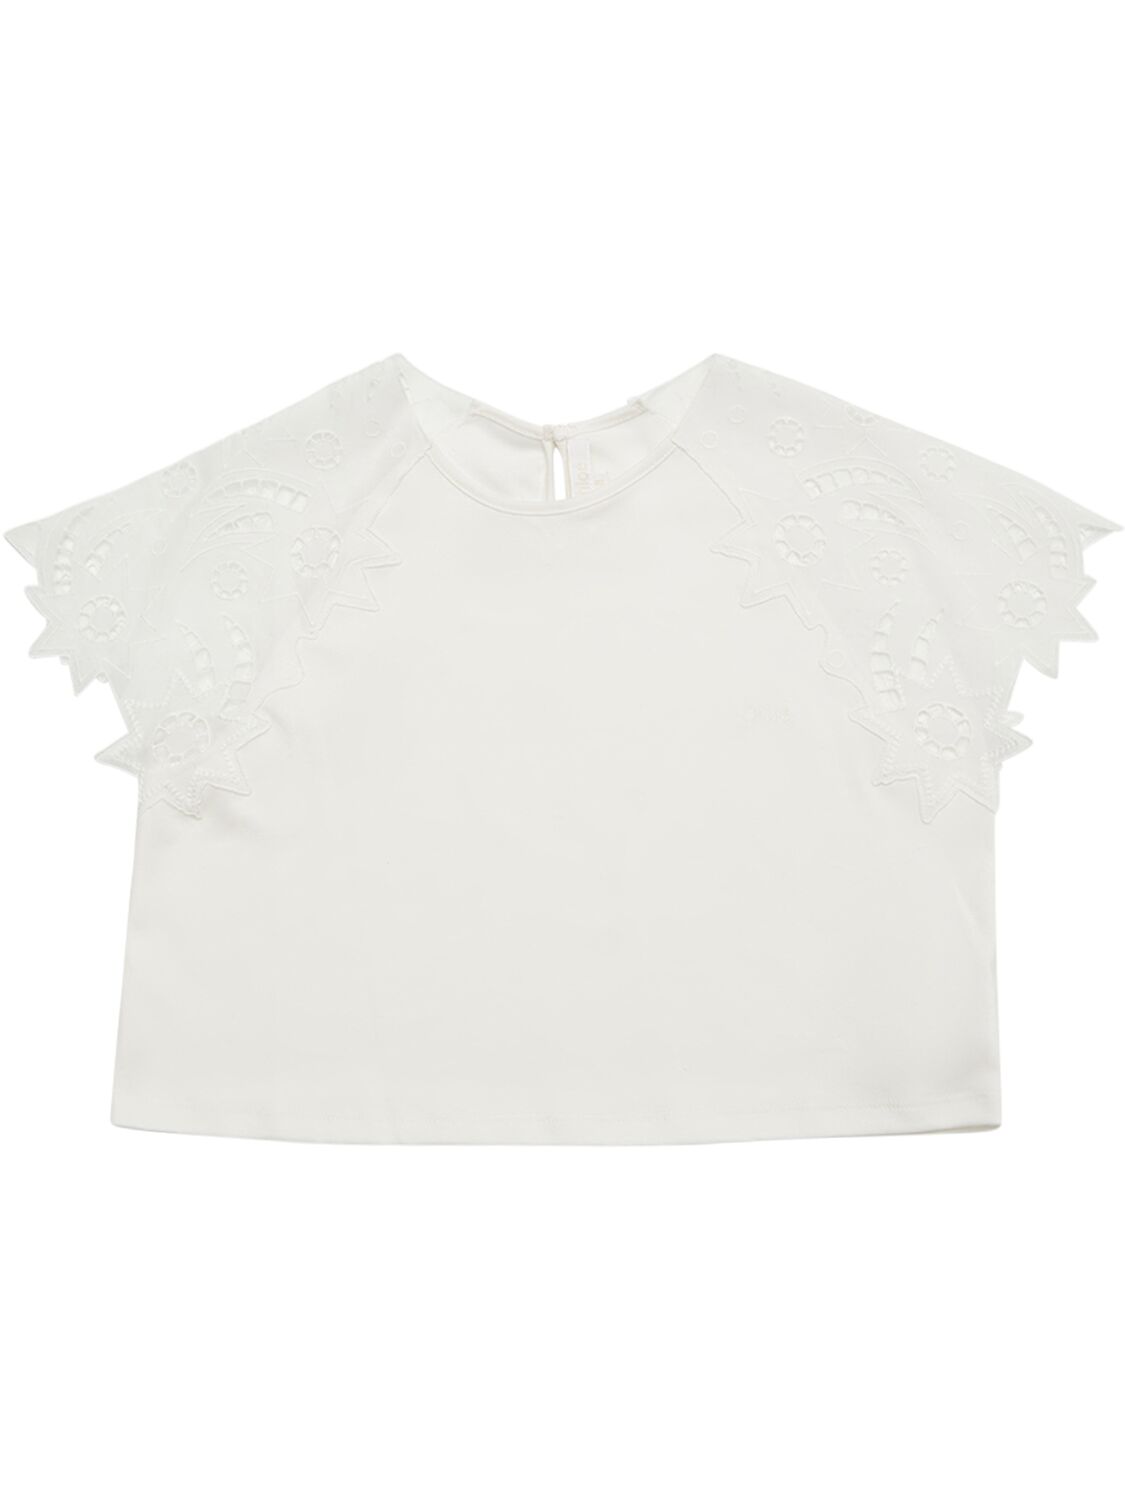 Image of Embroidered Cotton T-shirt